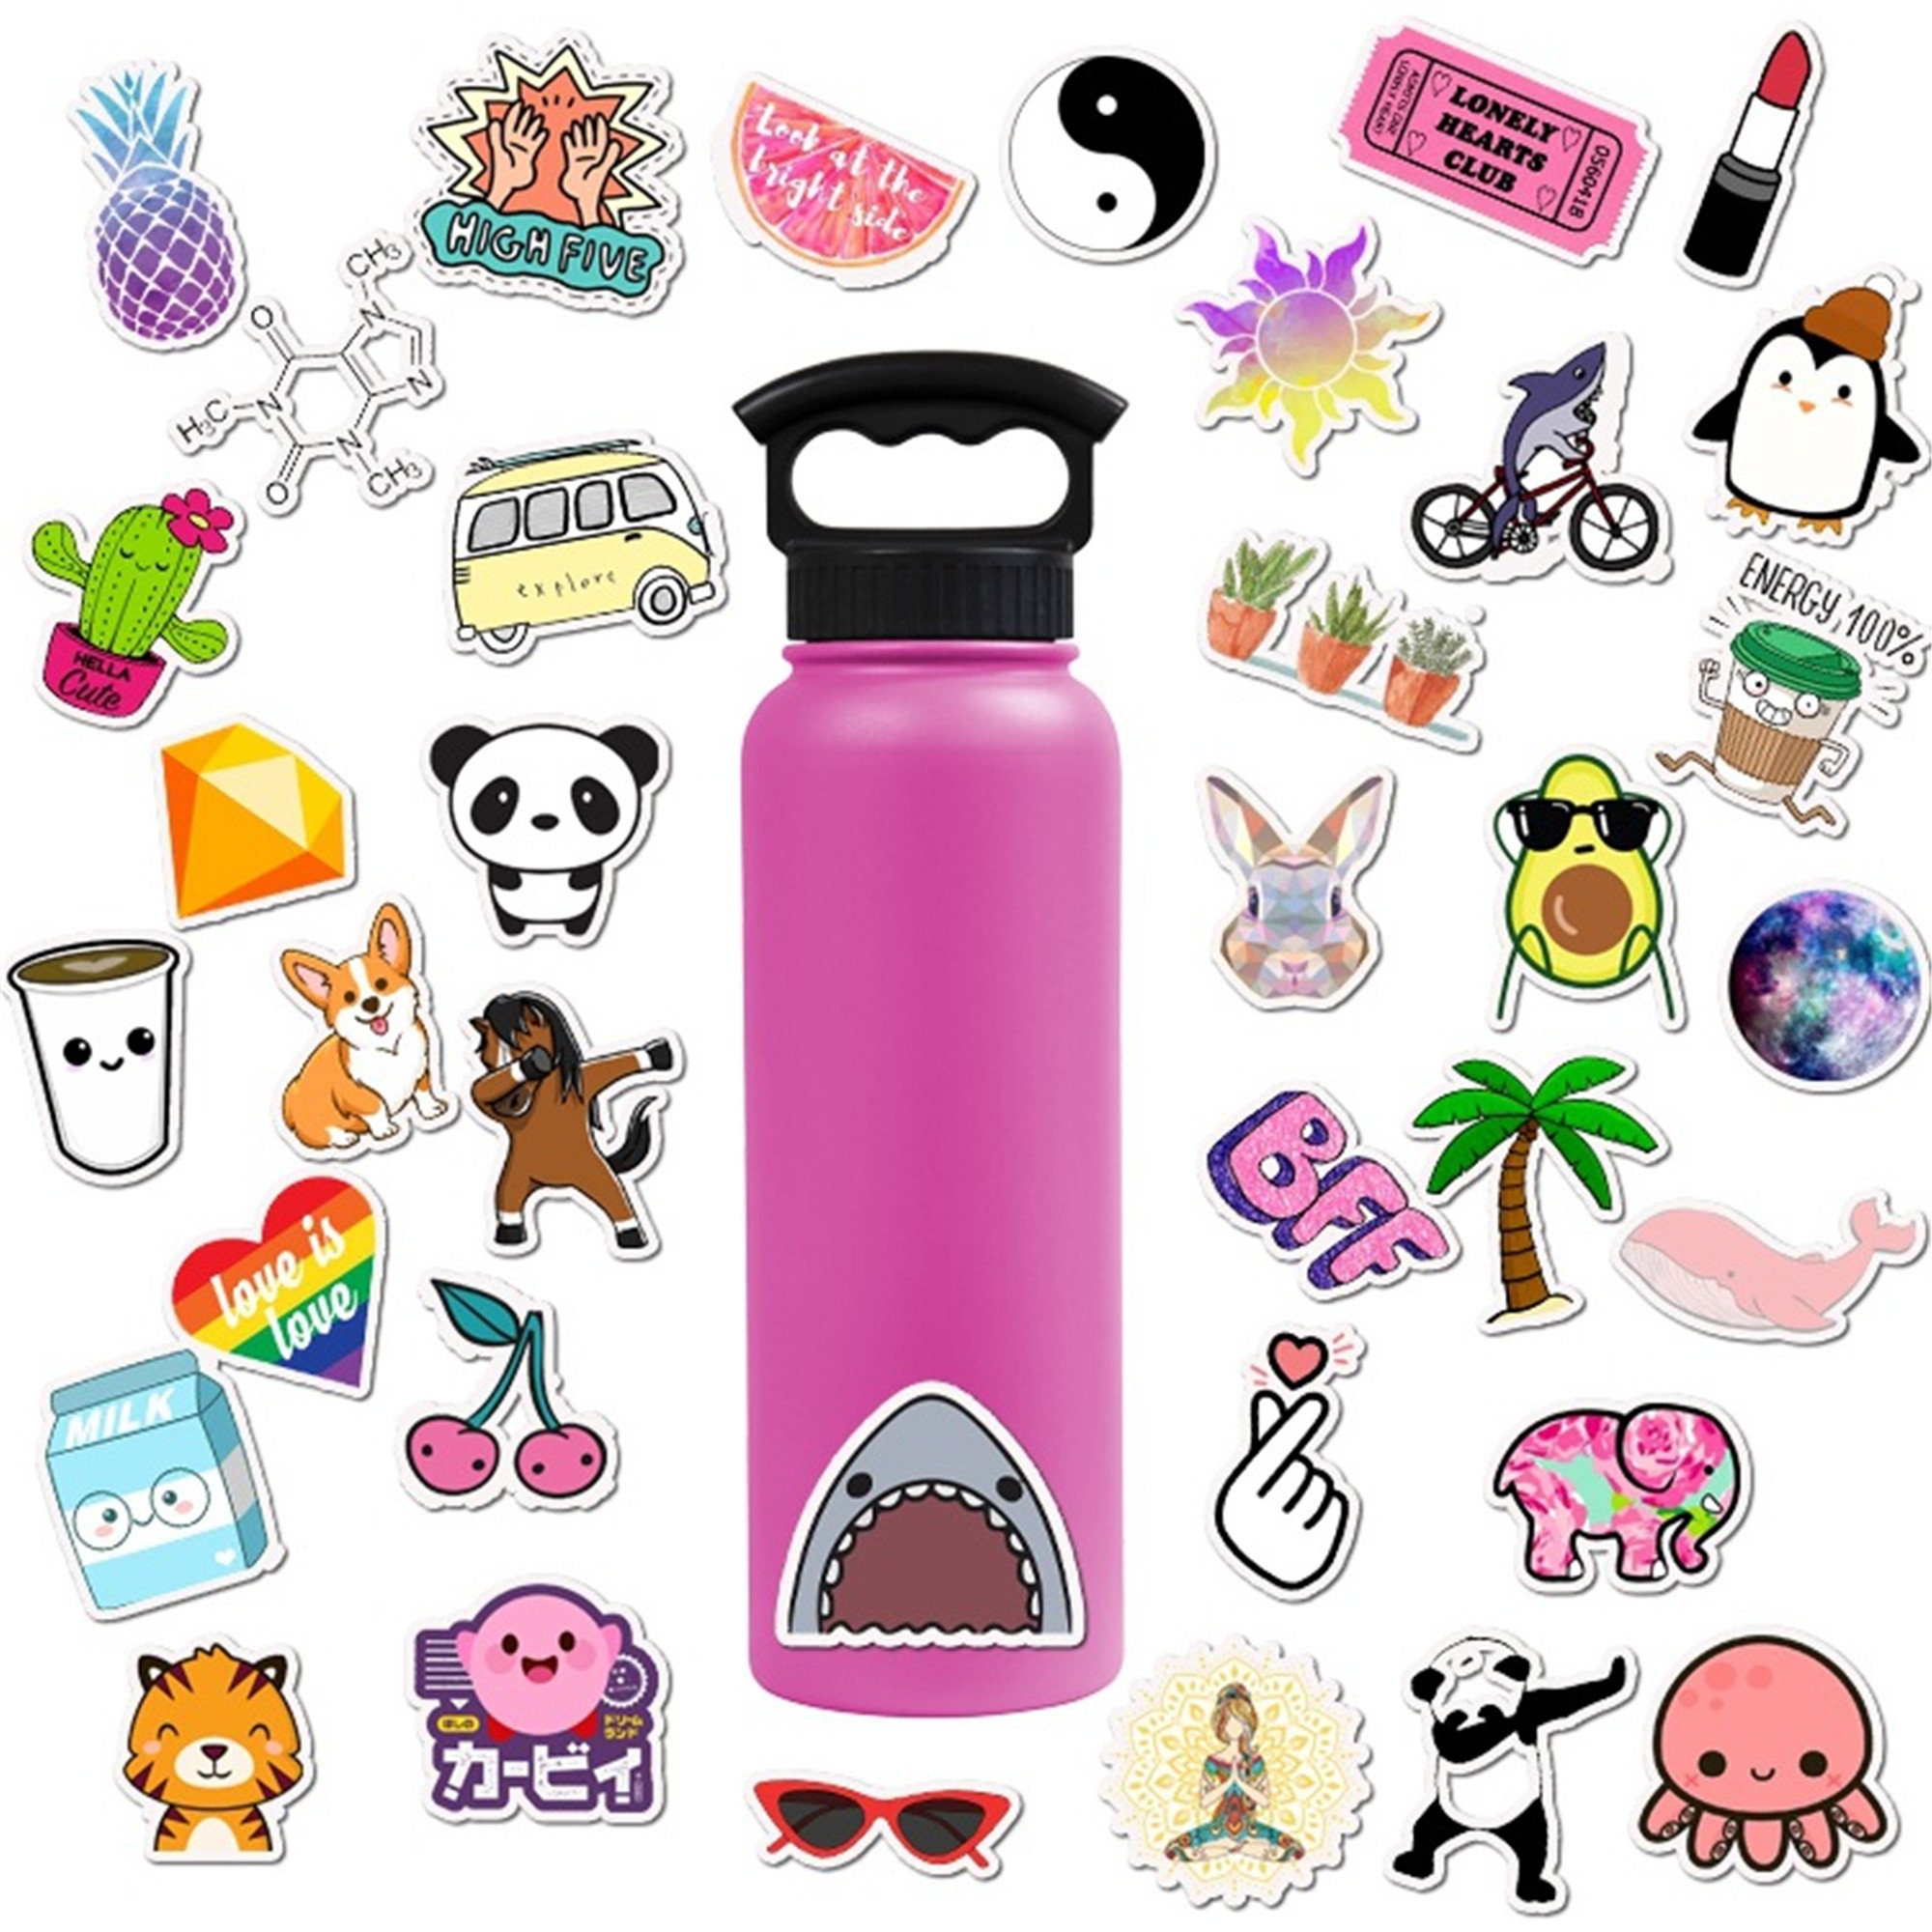 50 Pack Waterproof Retro Christmas Vinyl Cute Stickers For Journal For  Luggage, Water Bottle, Laptop, Car, Planner, Scrapbooking, Phone, Mac Door,  And Wall Decals From Homezy, $1.9